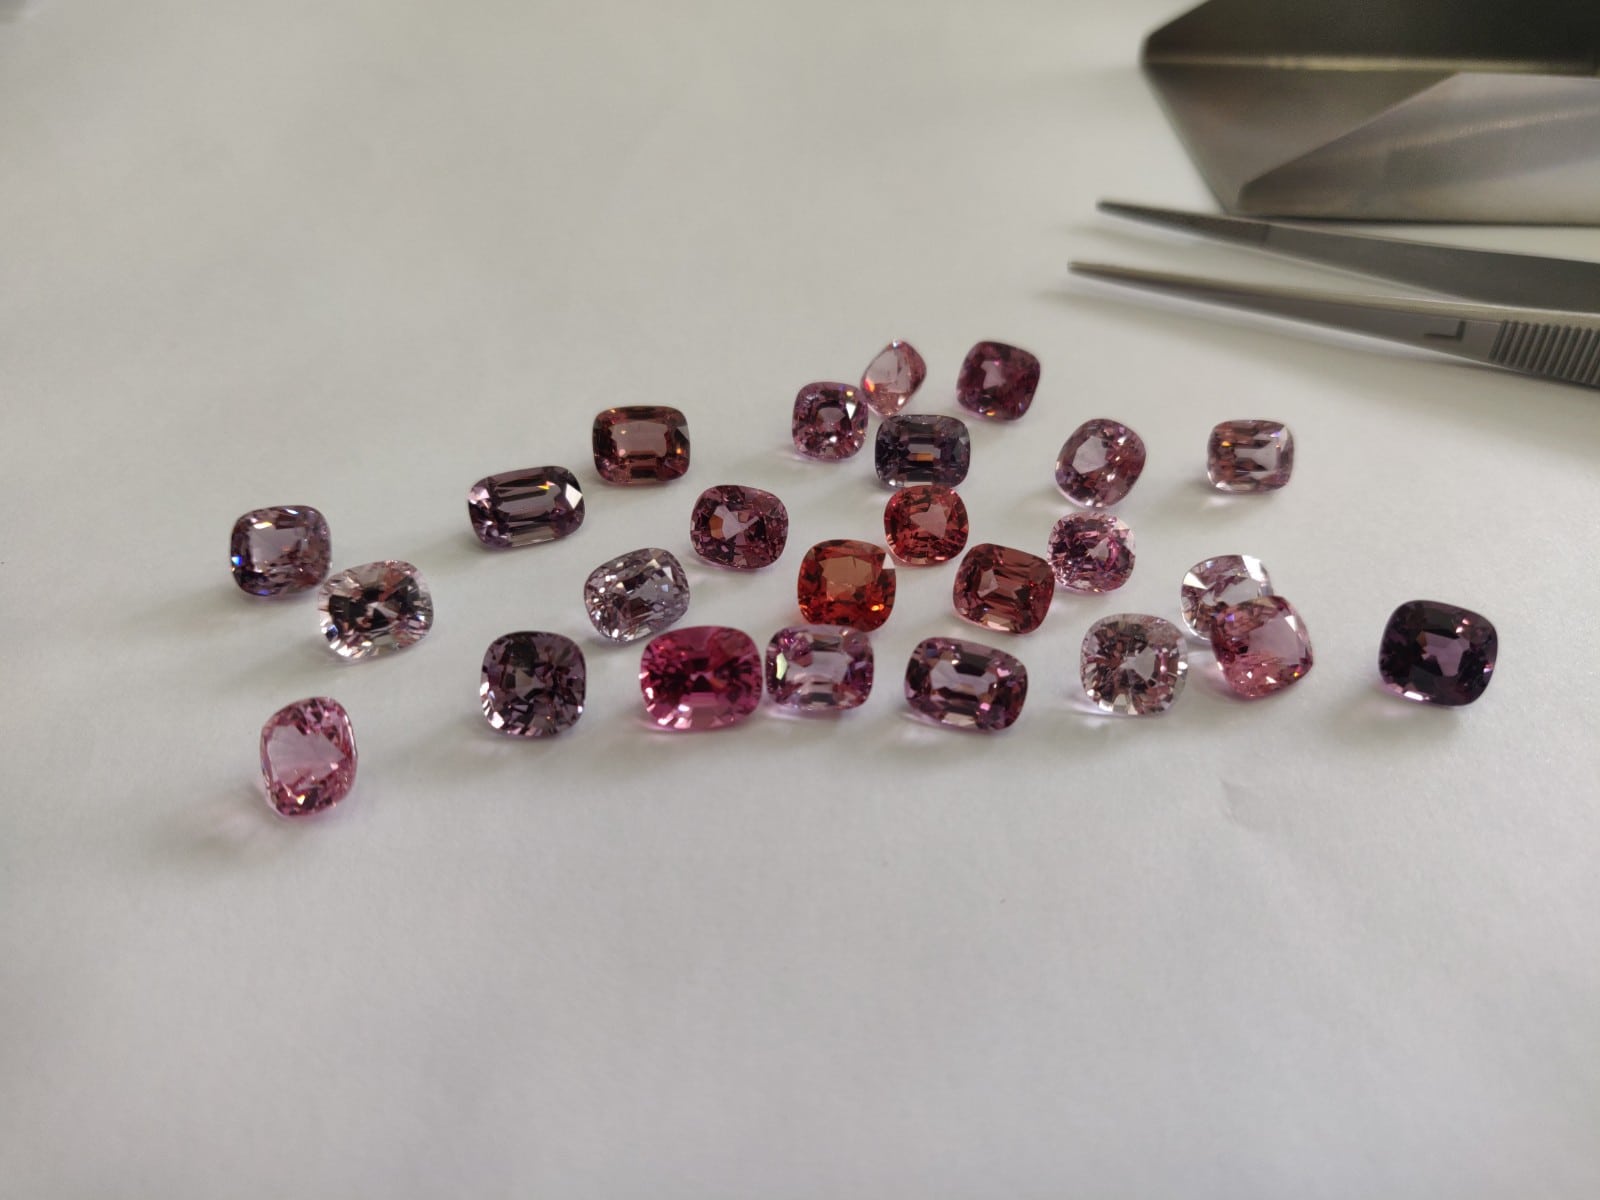 FAMOUS GEMSTONES THAT ARE ACTUALLY SPINELS